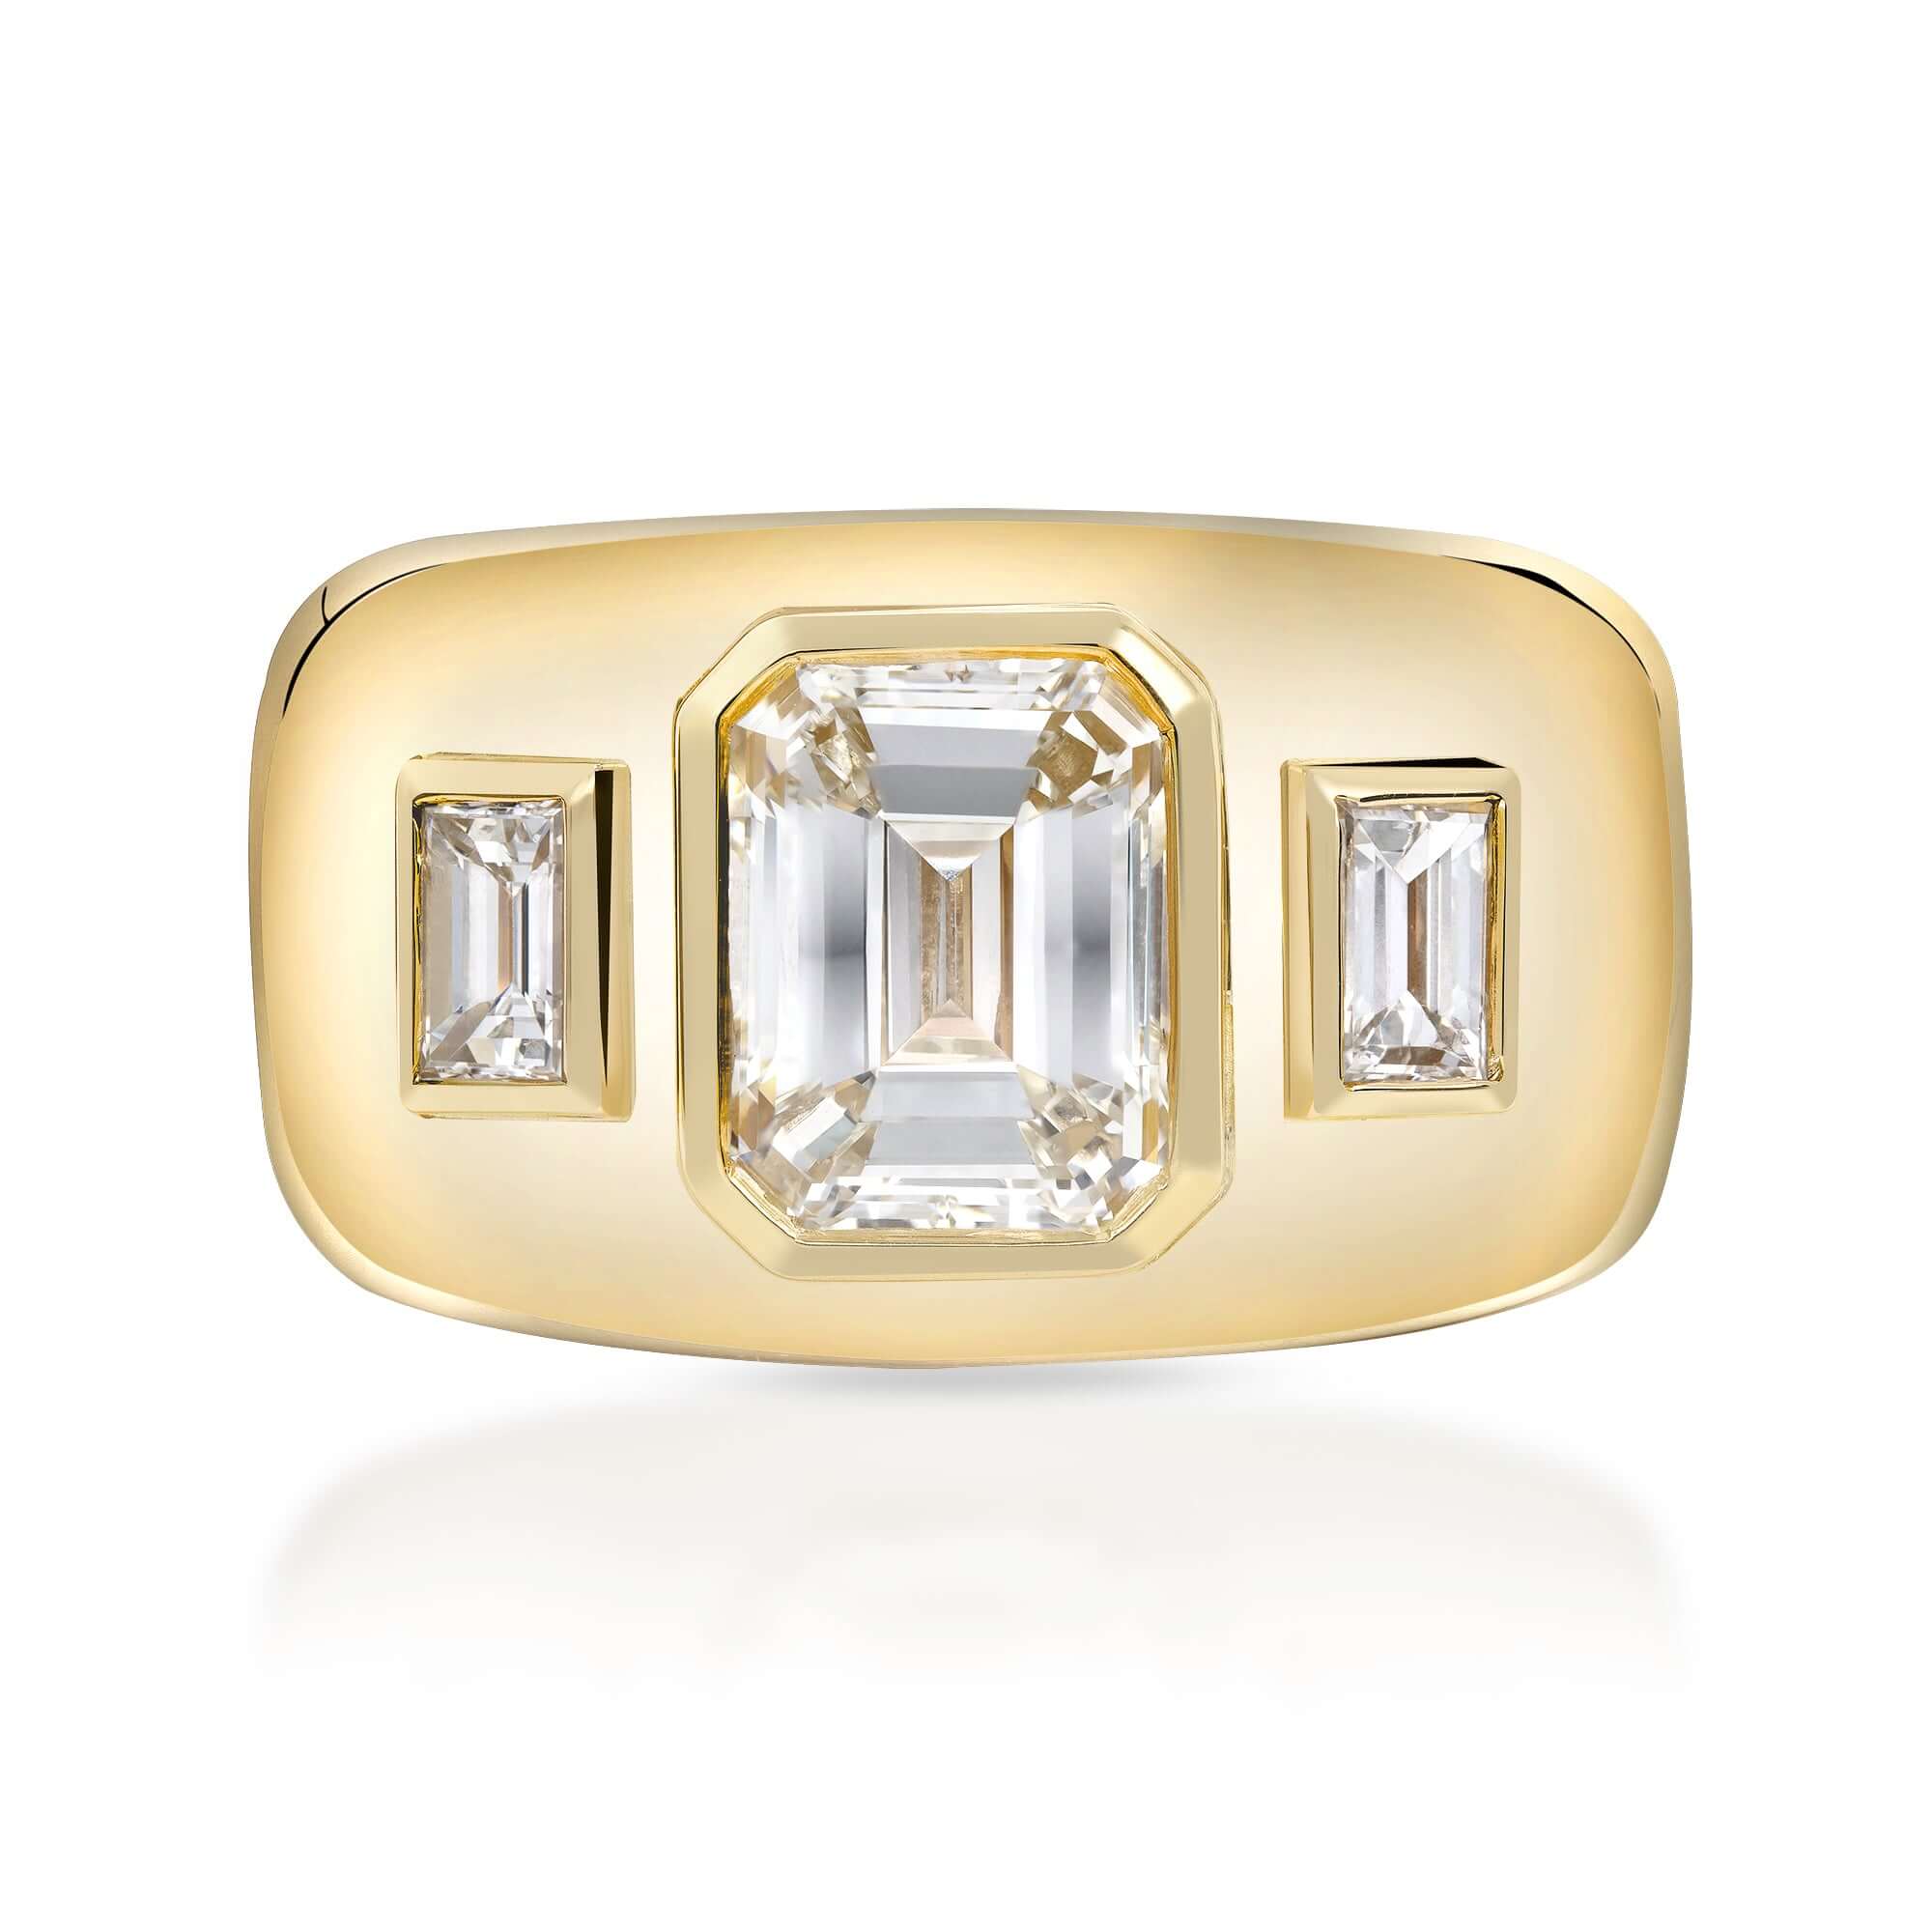 SINGLE STONE BEAUX RING featuring 2.02ct K/VVS1 GIA certified emerald cut diamond with 0.34ctw baguette cut accent diamonds set in a handcrafted 18K yellow gold mounting.